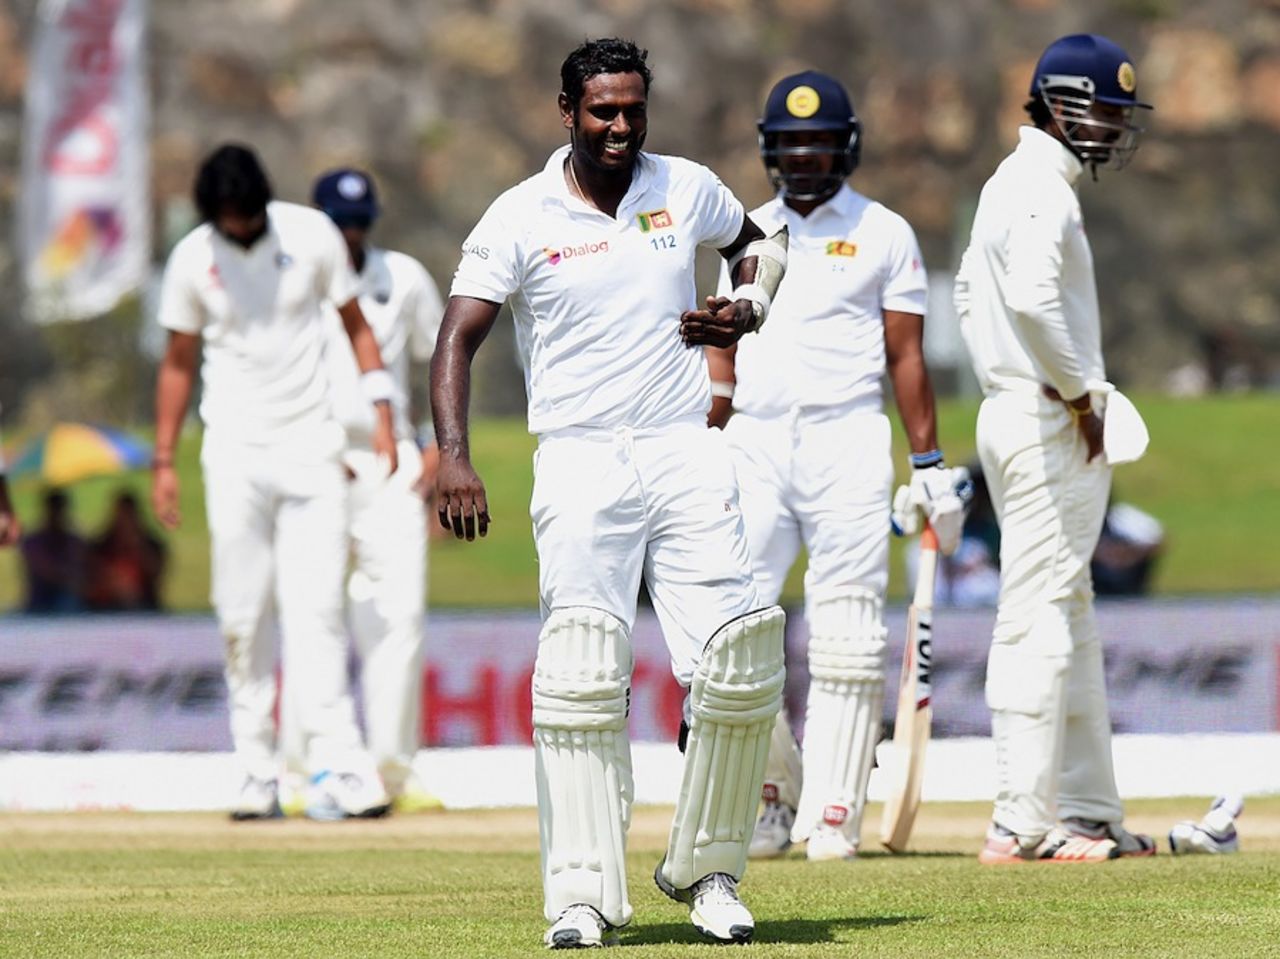 Angelo Mathews winces after getting hit by Ishant Sharma, Sri Lanka v India, 1st Test, Galle, 3rd day, August 14, 2015